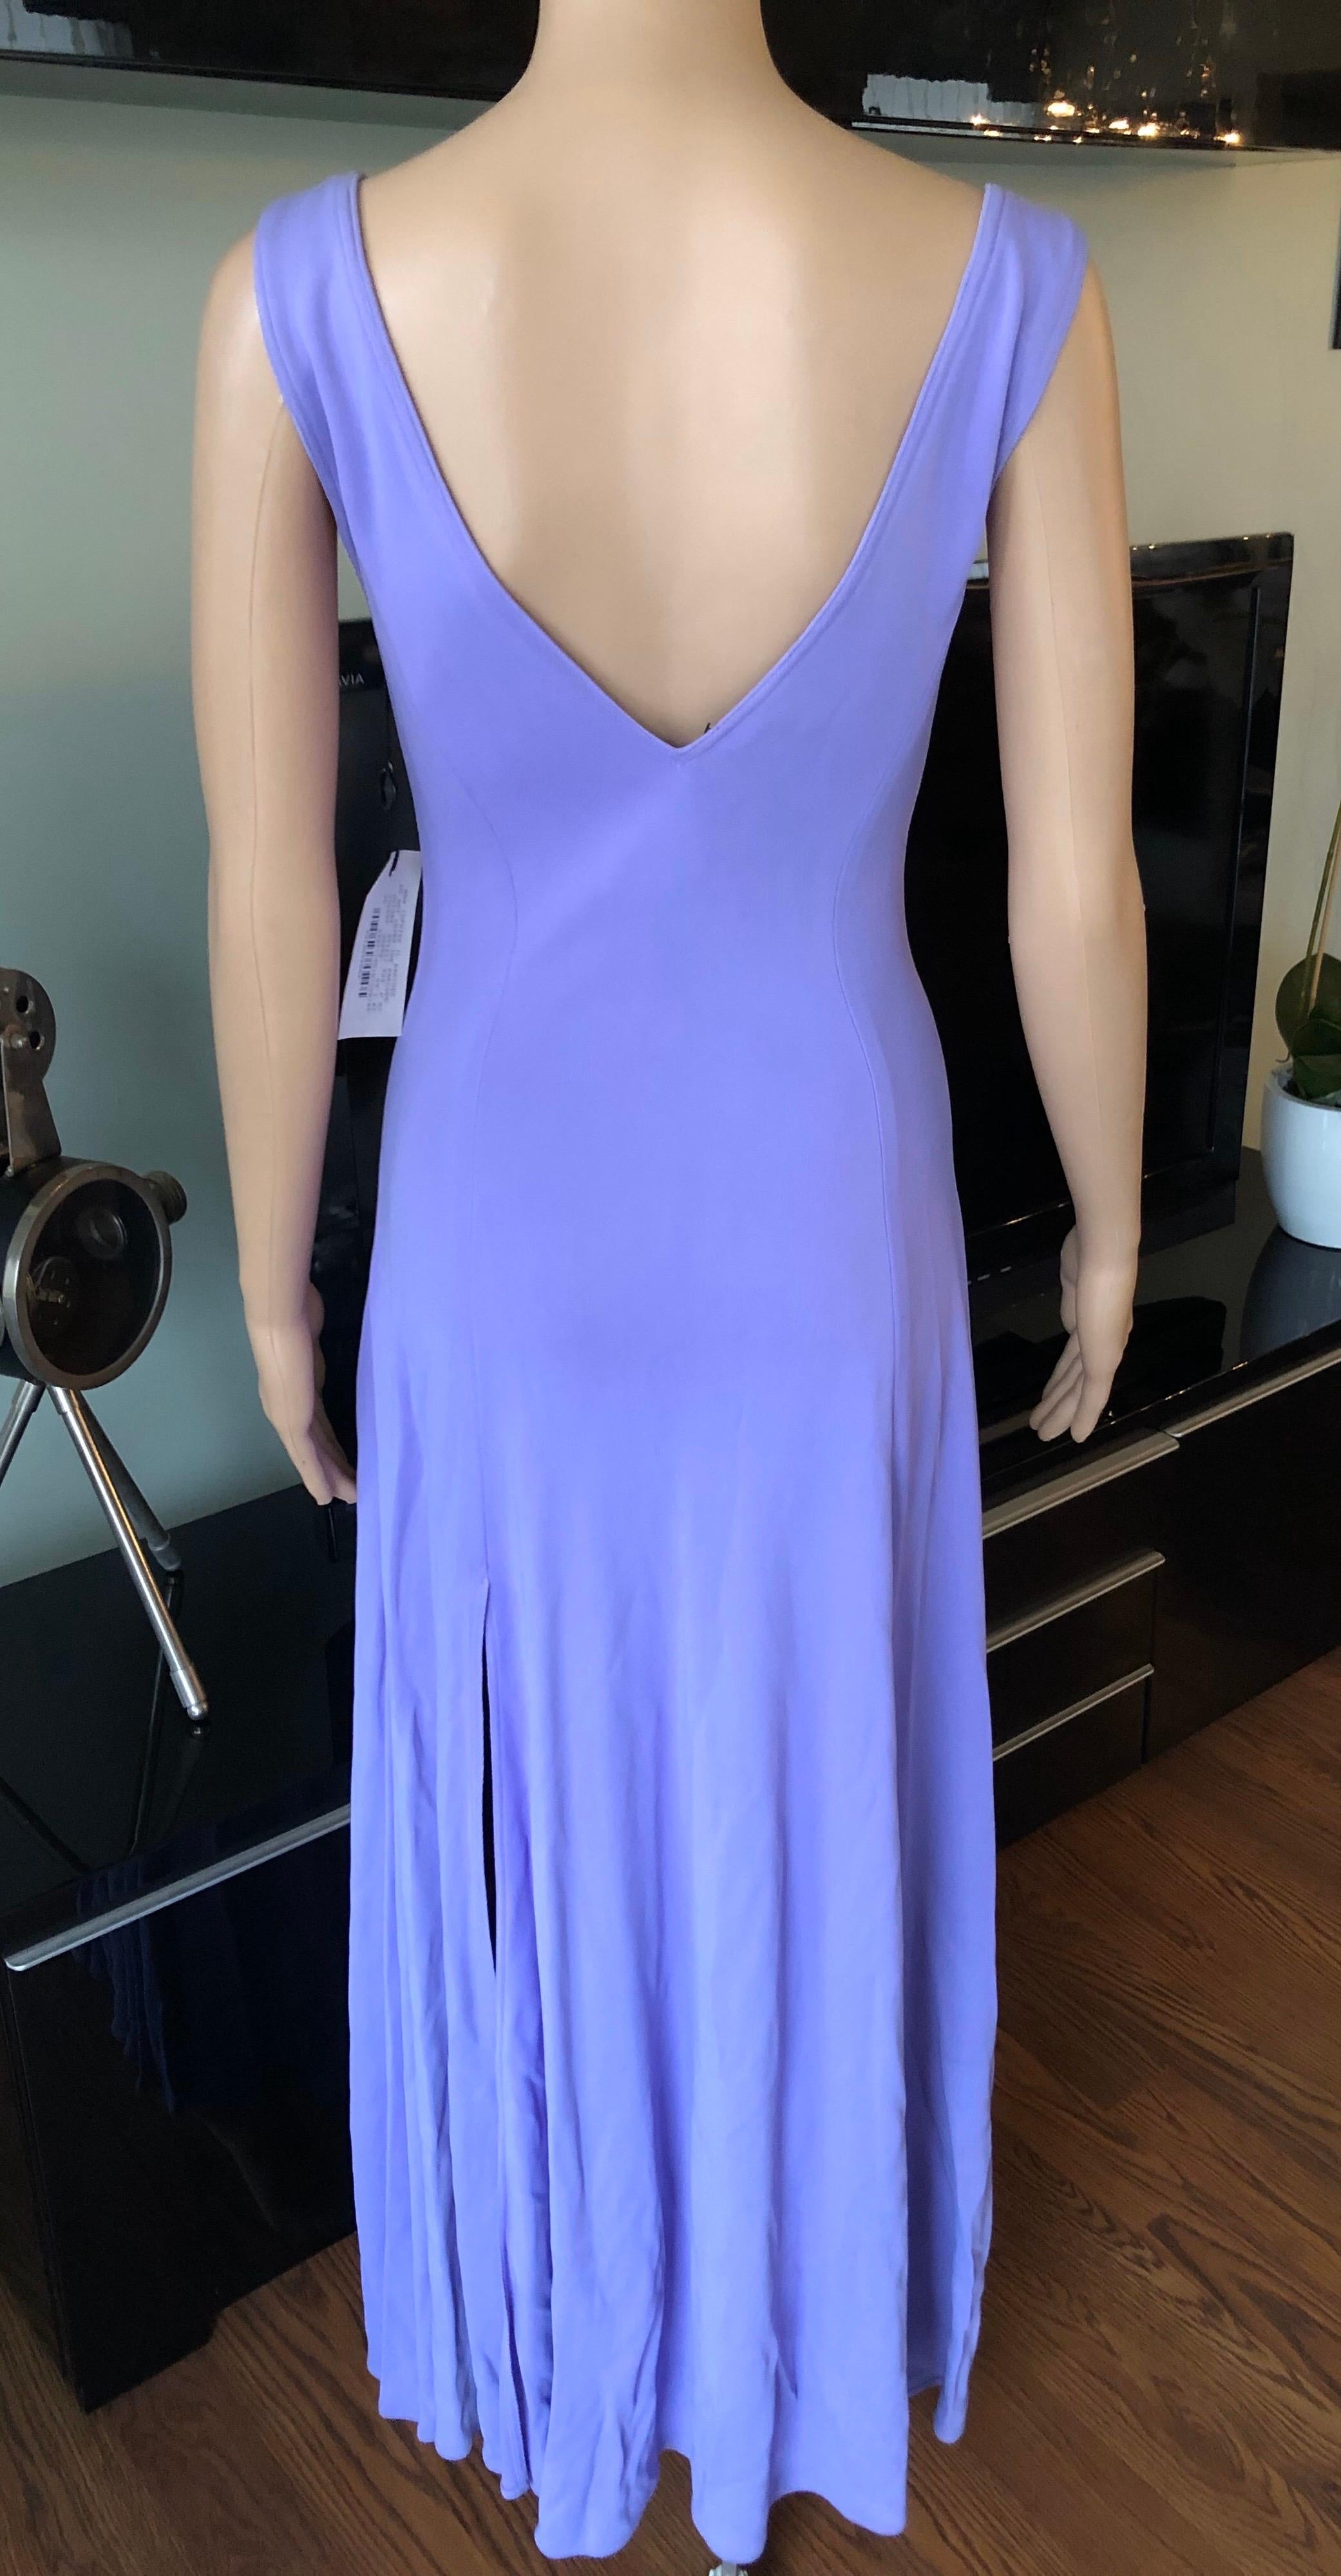 Gianni Versace S/S 1993 Runway Vintage Maxi Evening Dress IT 42

Look 13 from the Spring 1993 Collection. Gianni Versace lavender maxi evening dress featuring plunging neckline, four high-slits at hem and concealed zip closure at side. Includes